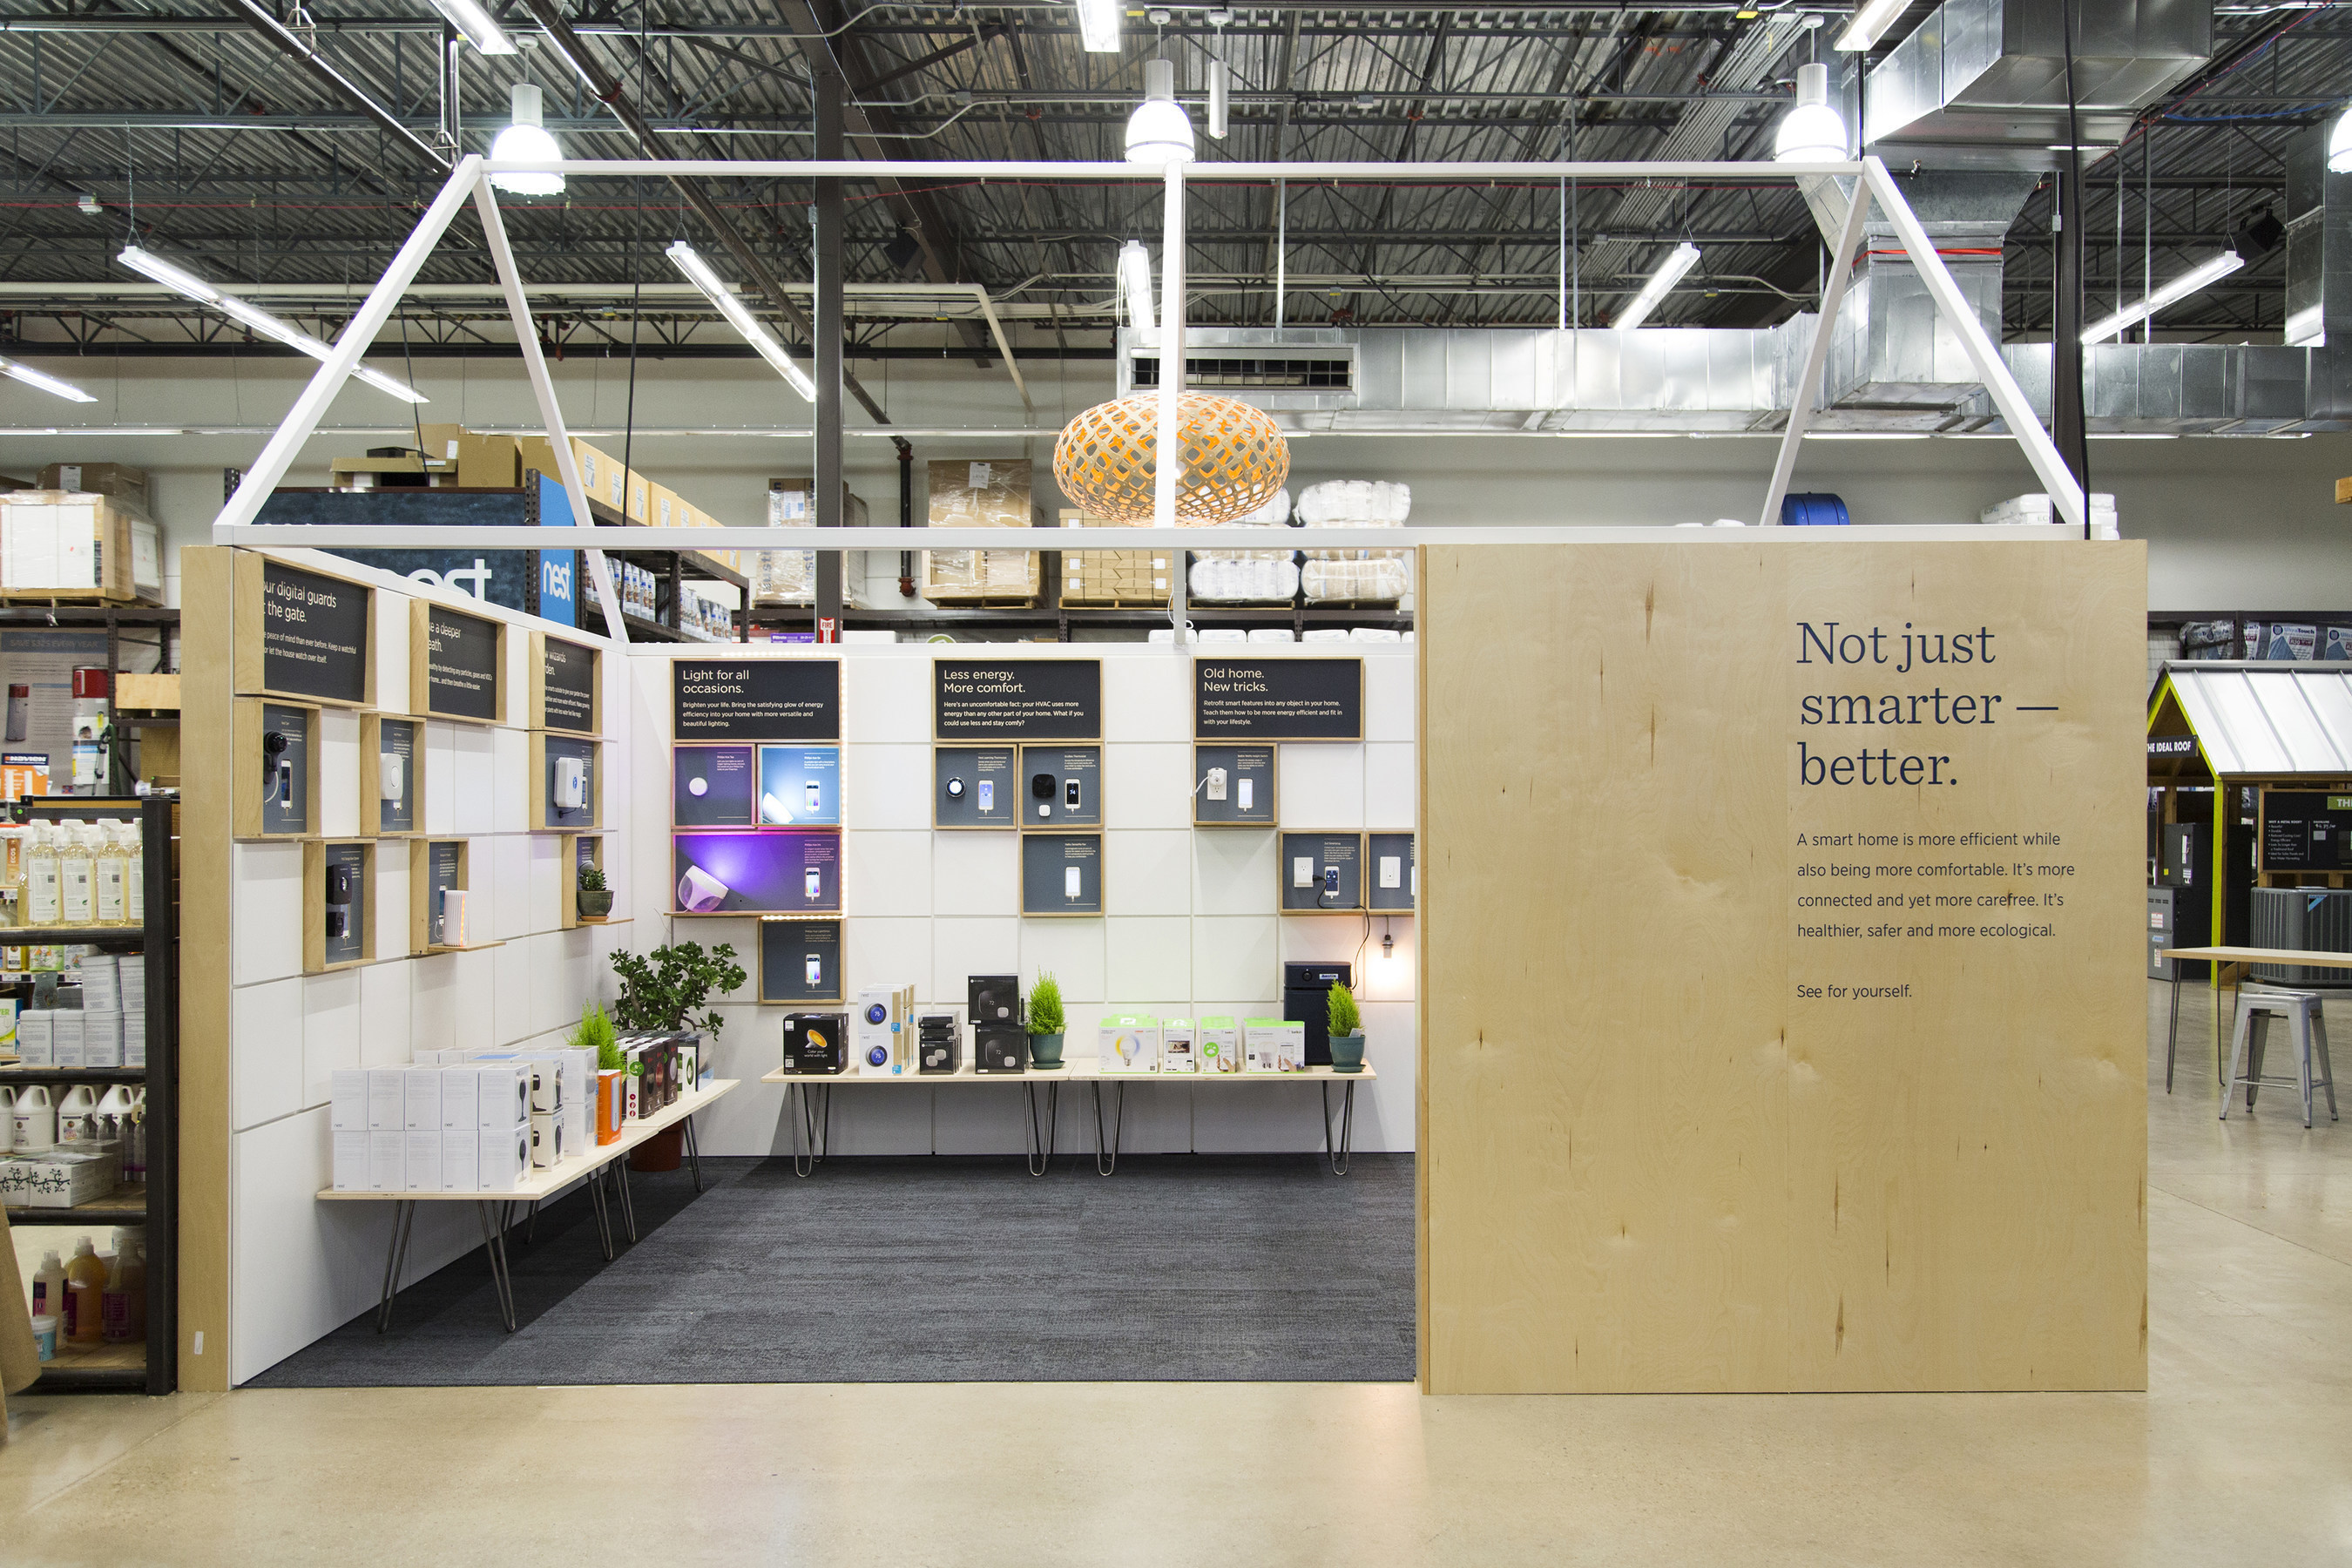 TreeHouse's 2015 top smart-home products are featured inside TreeHouse's flagship Austin store. The list includes thermostats that know when you're sleeping, door locks and lighting you control from your phone, and ceiling fans that sense when you're in the room.